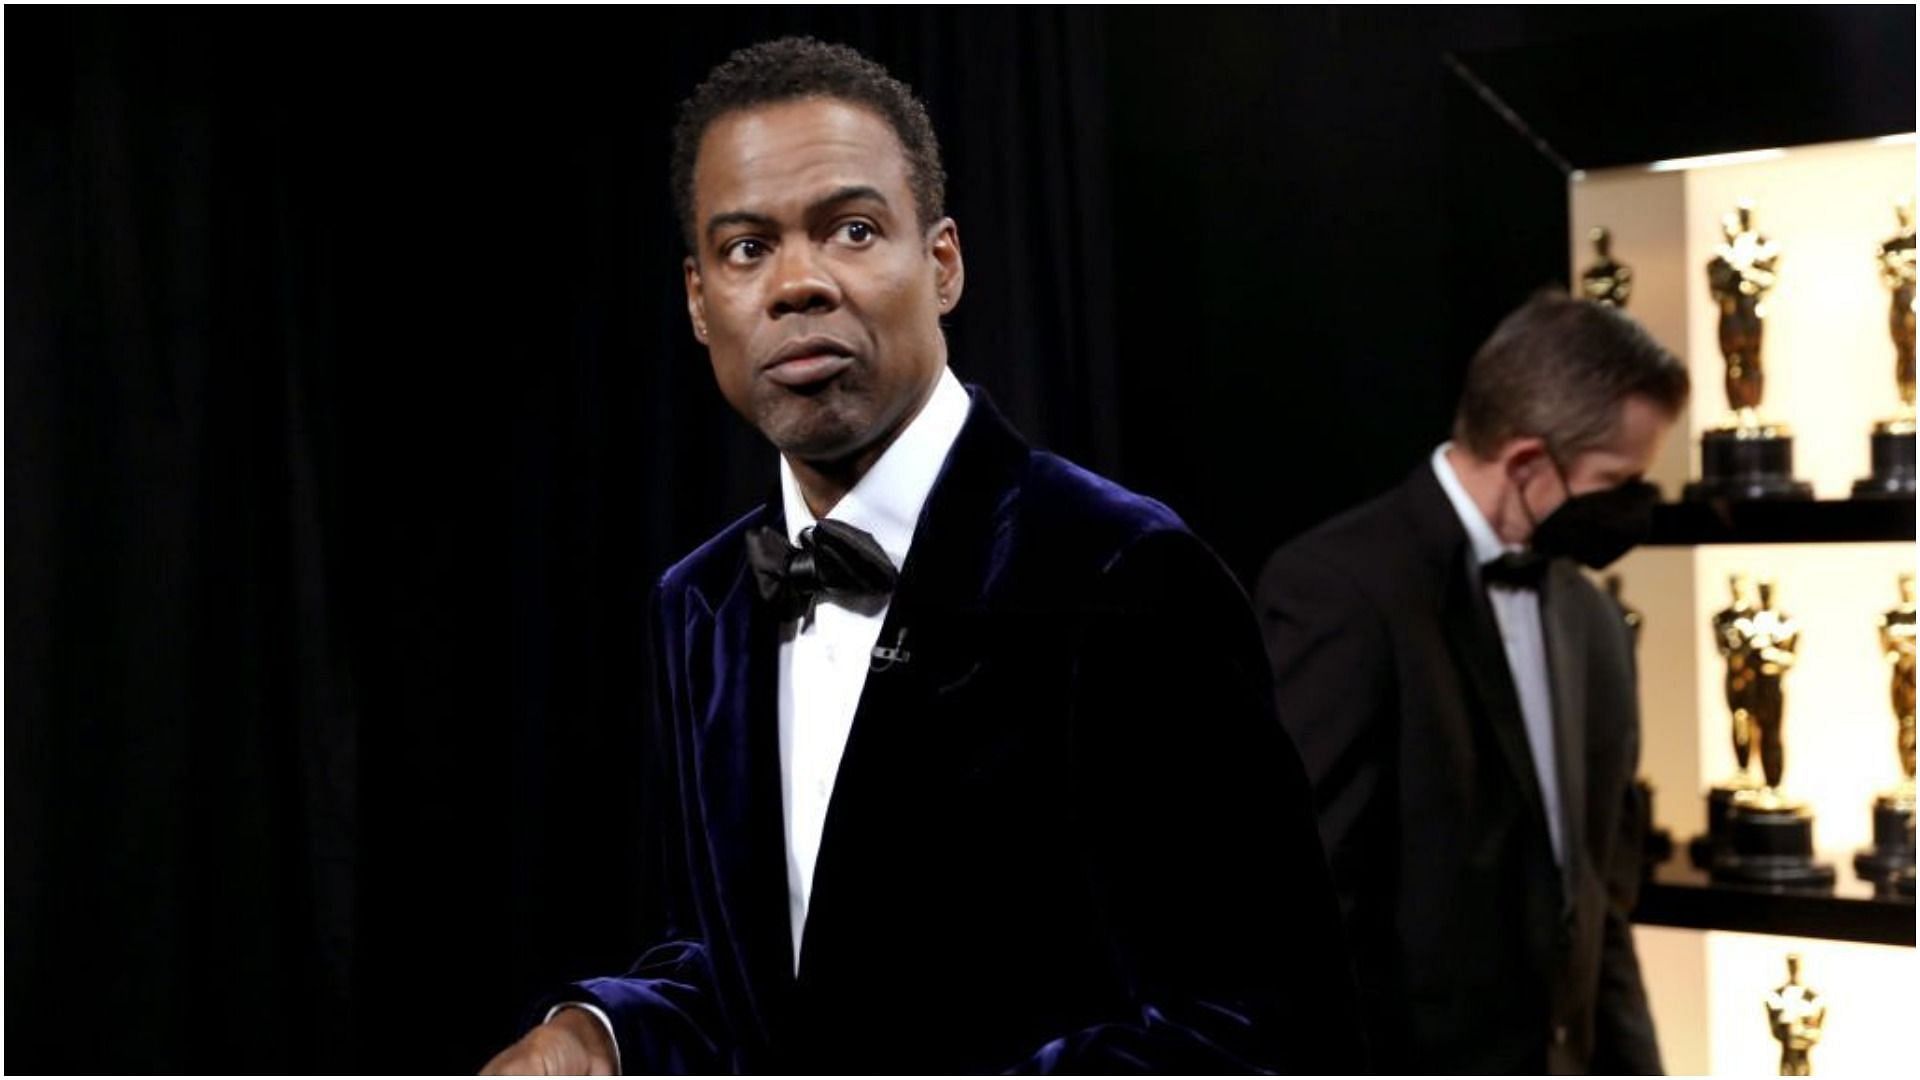 Chris Rock makes fun of Will Smith&#039;s slap at Oscars 2022 (Image via Al Seib/Getty Images)